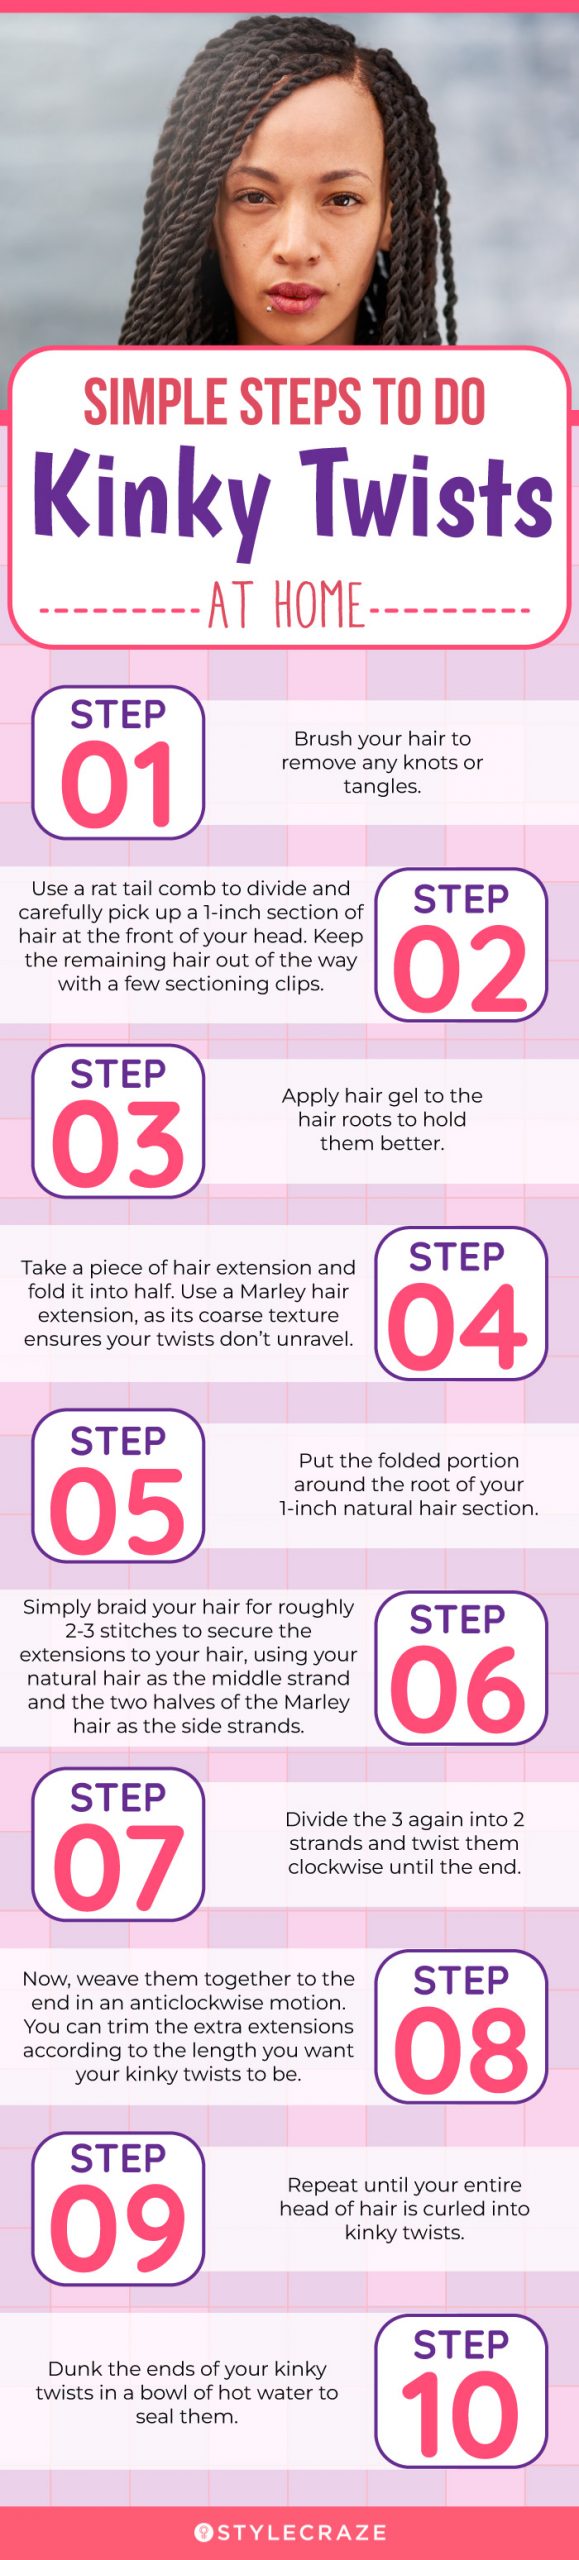 simple steps to do kinky twists at home (infographic)